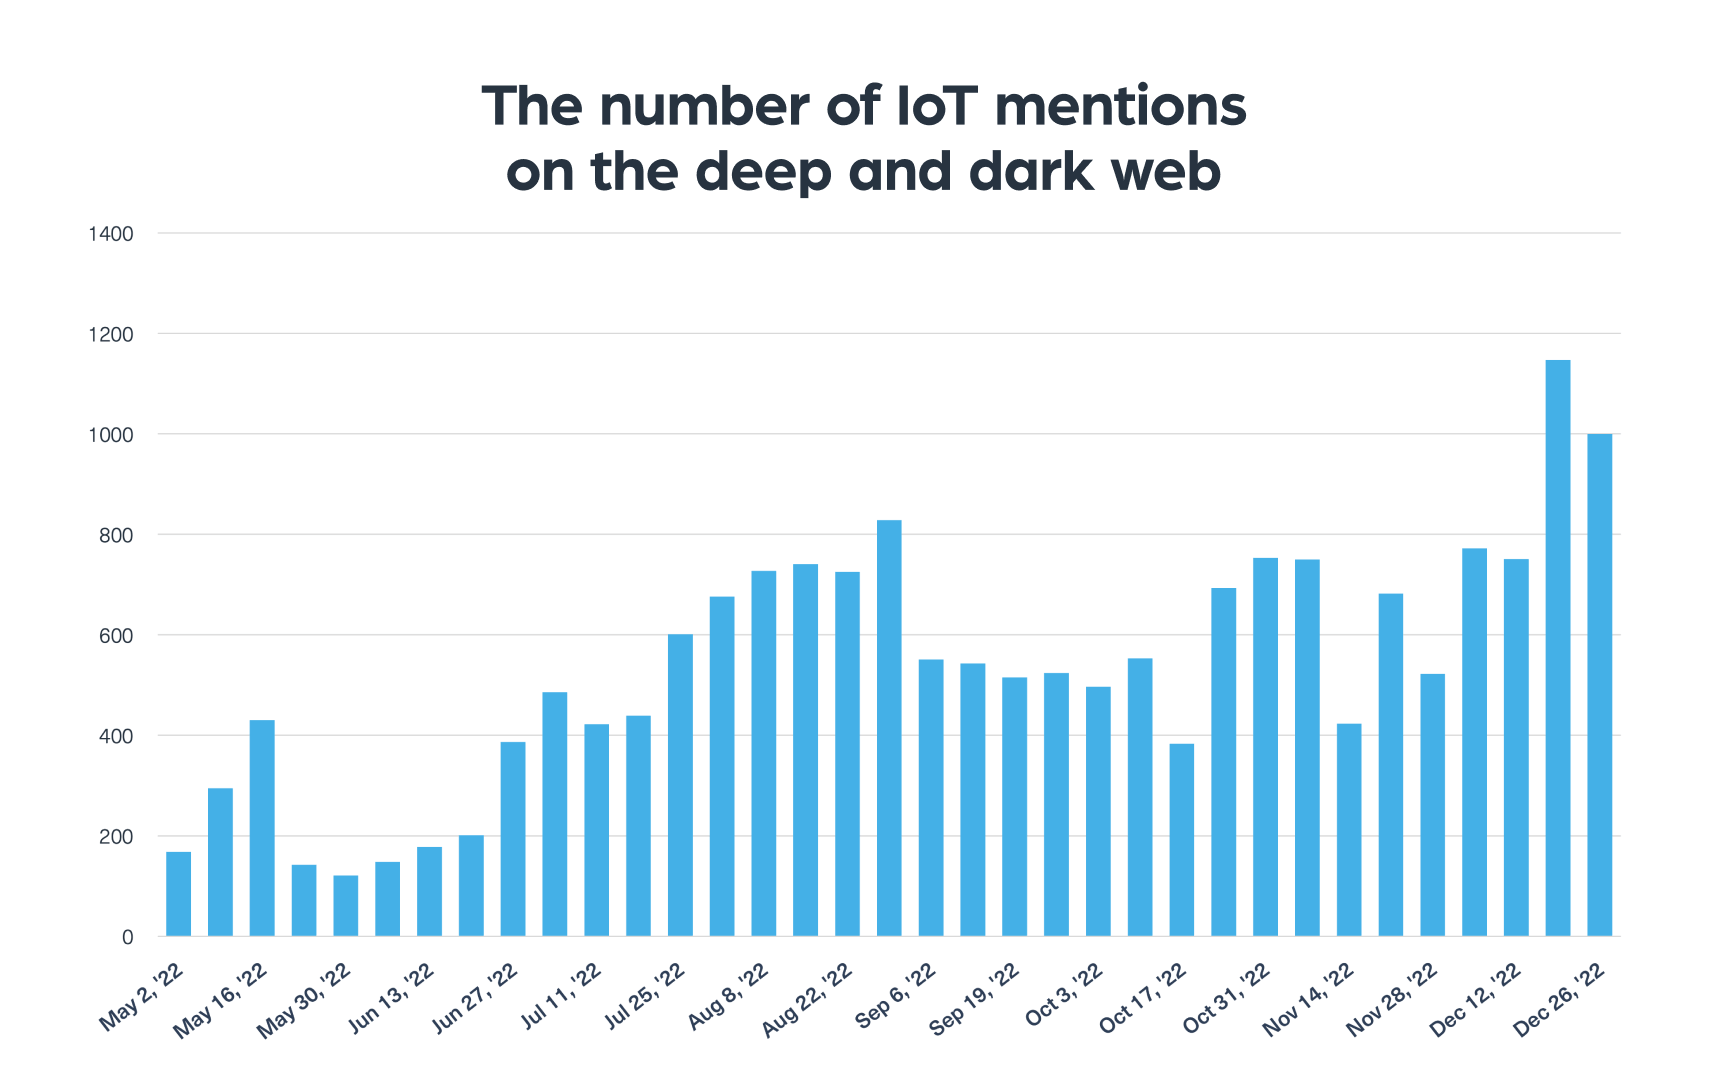 The number of IoT mentions on the deep and dark web